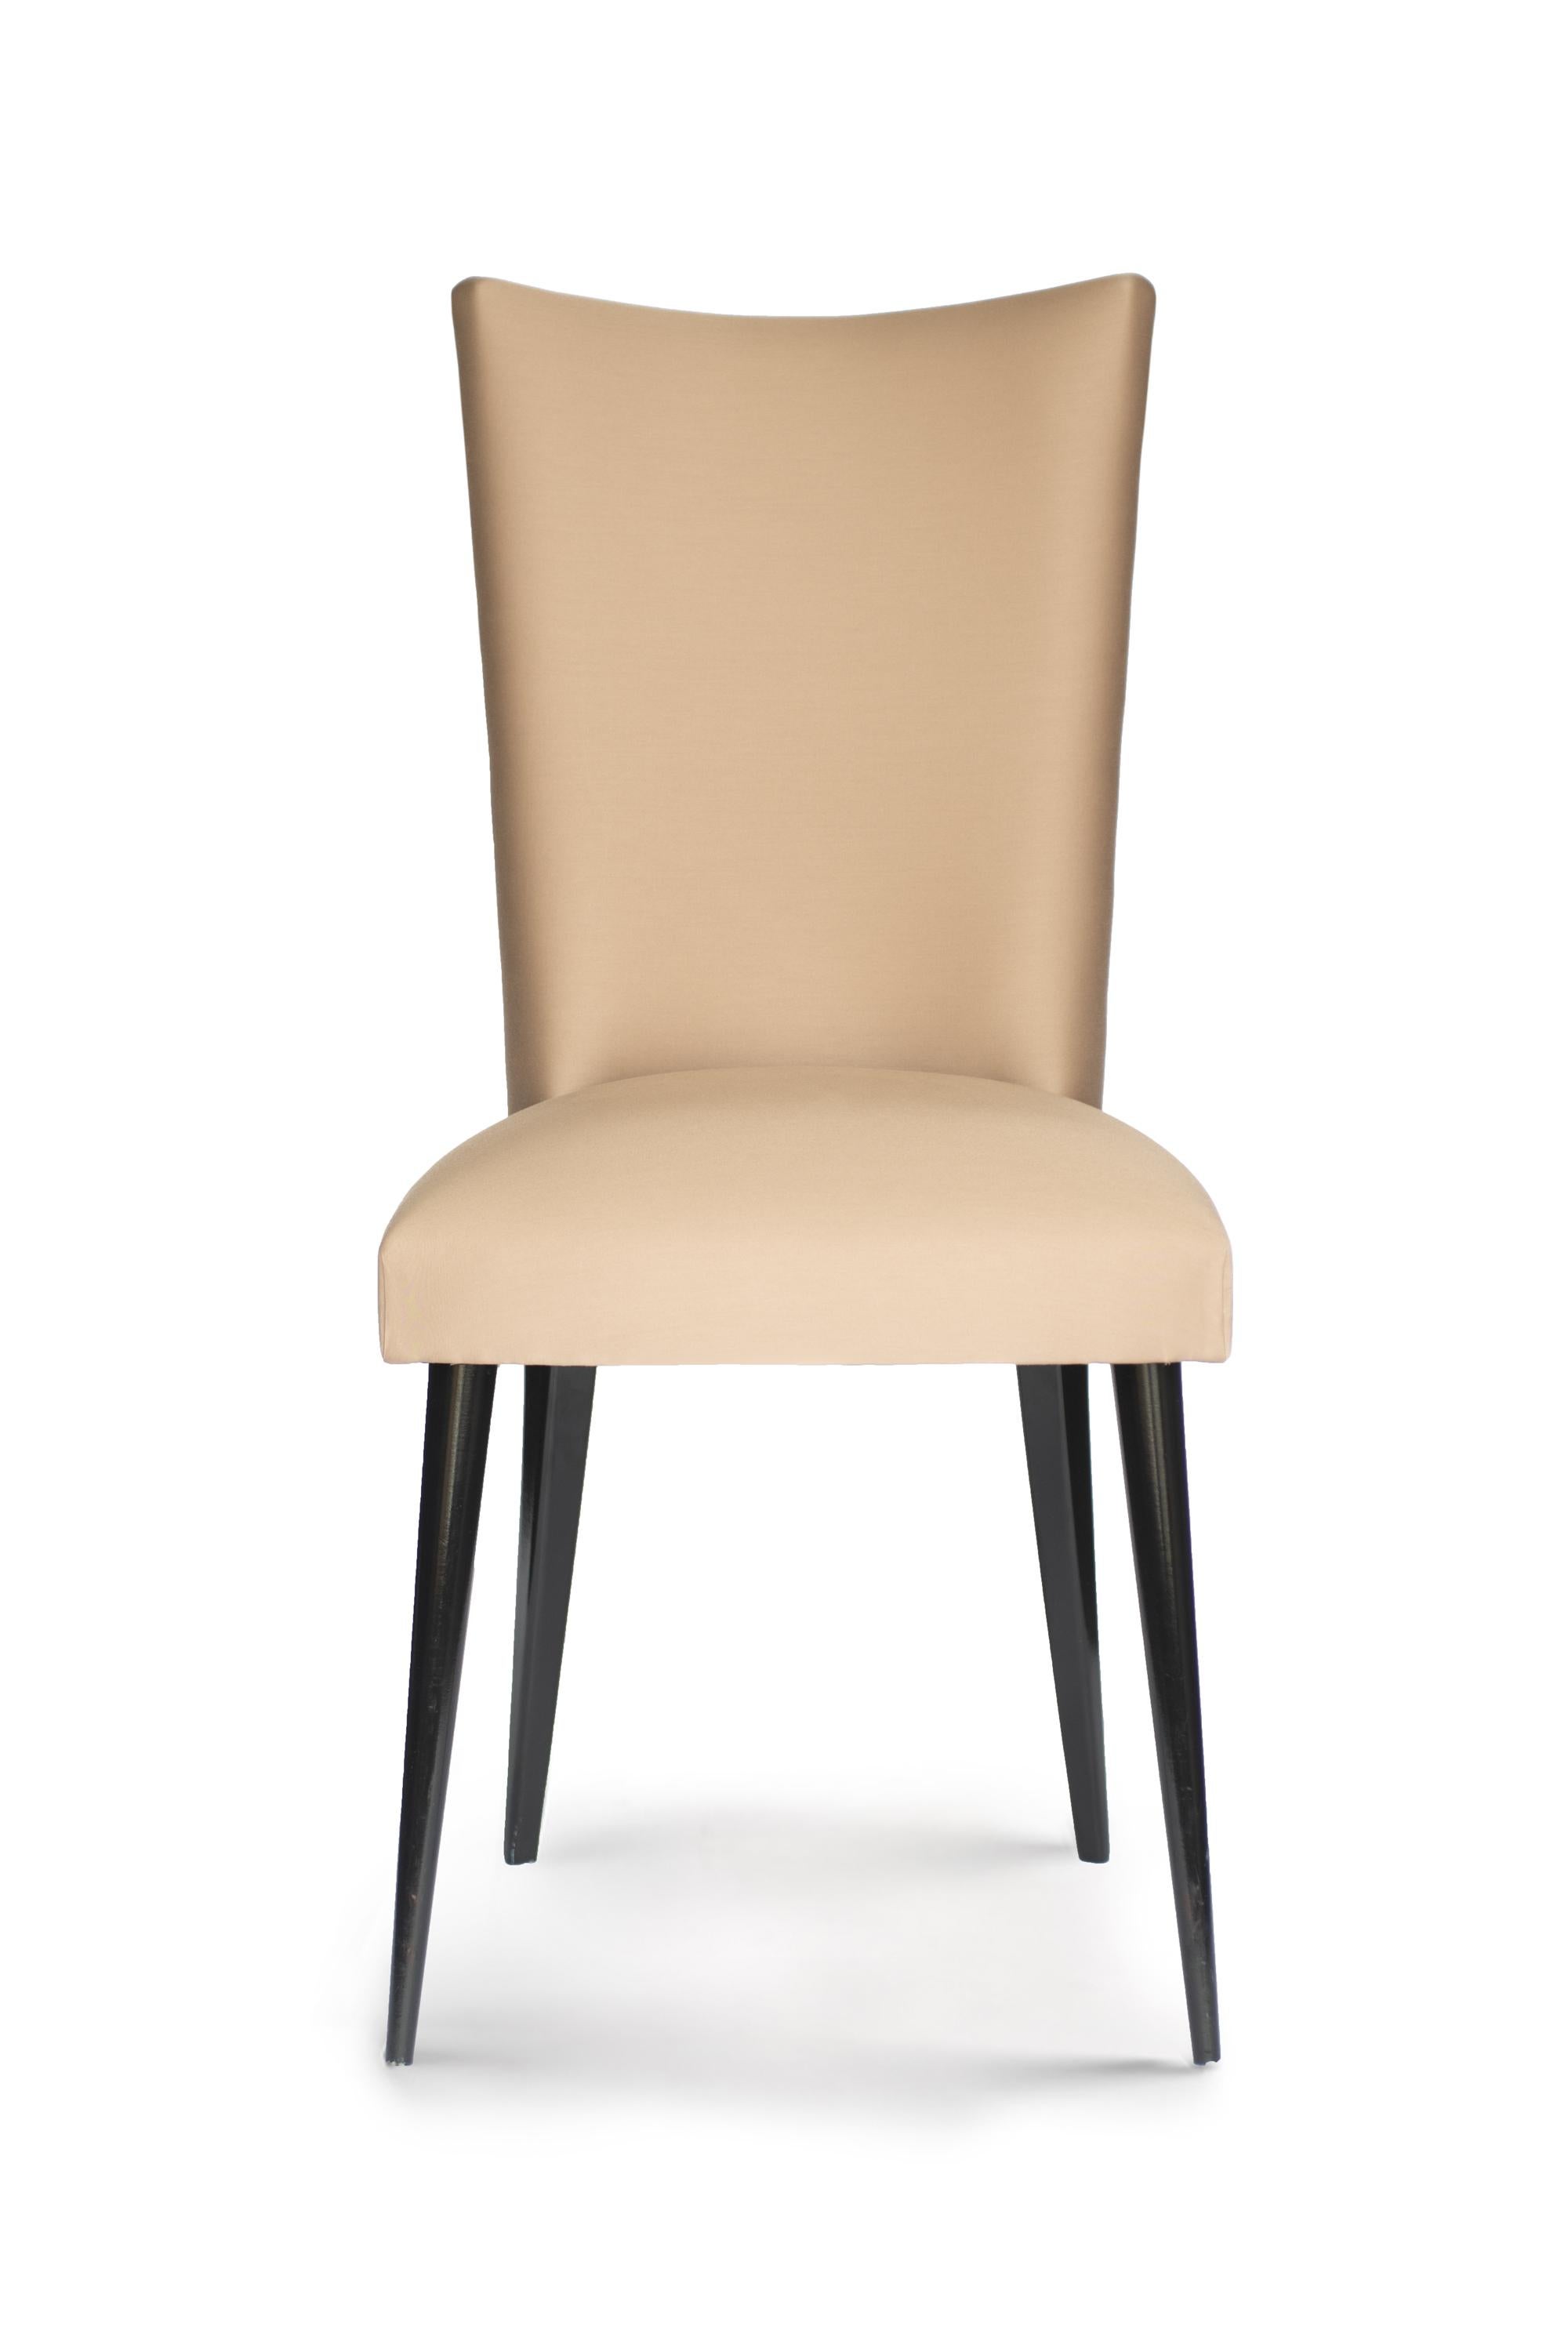 Aiveen Daly Iced Pearl Stiletto Chair  For Sale 2